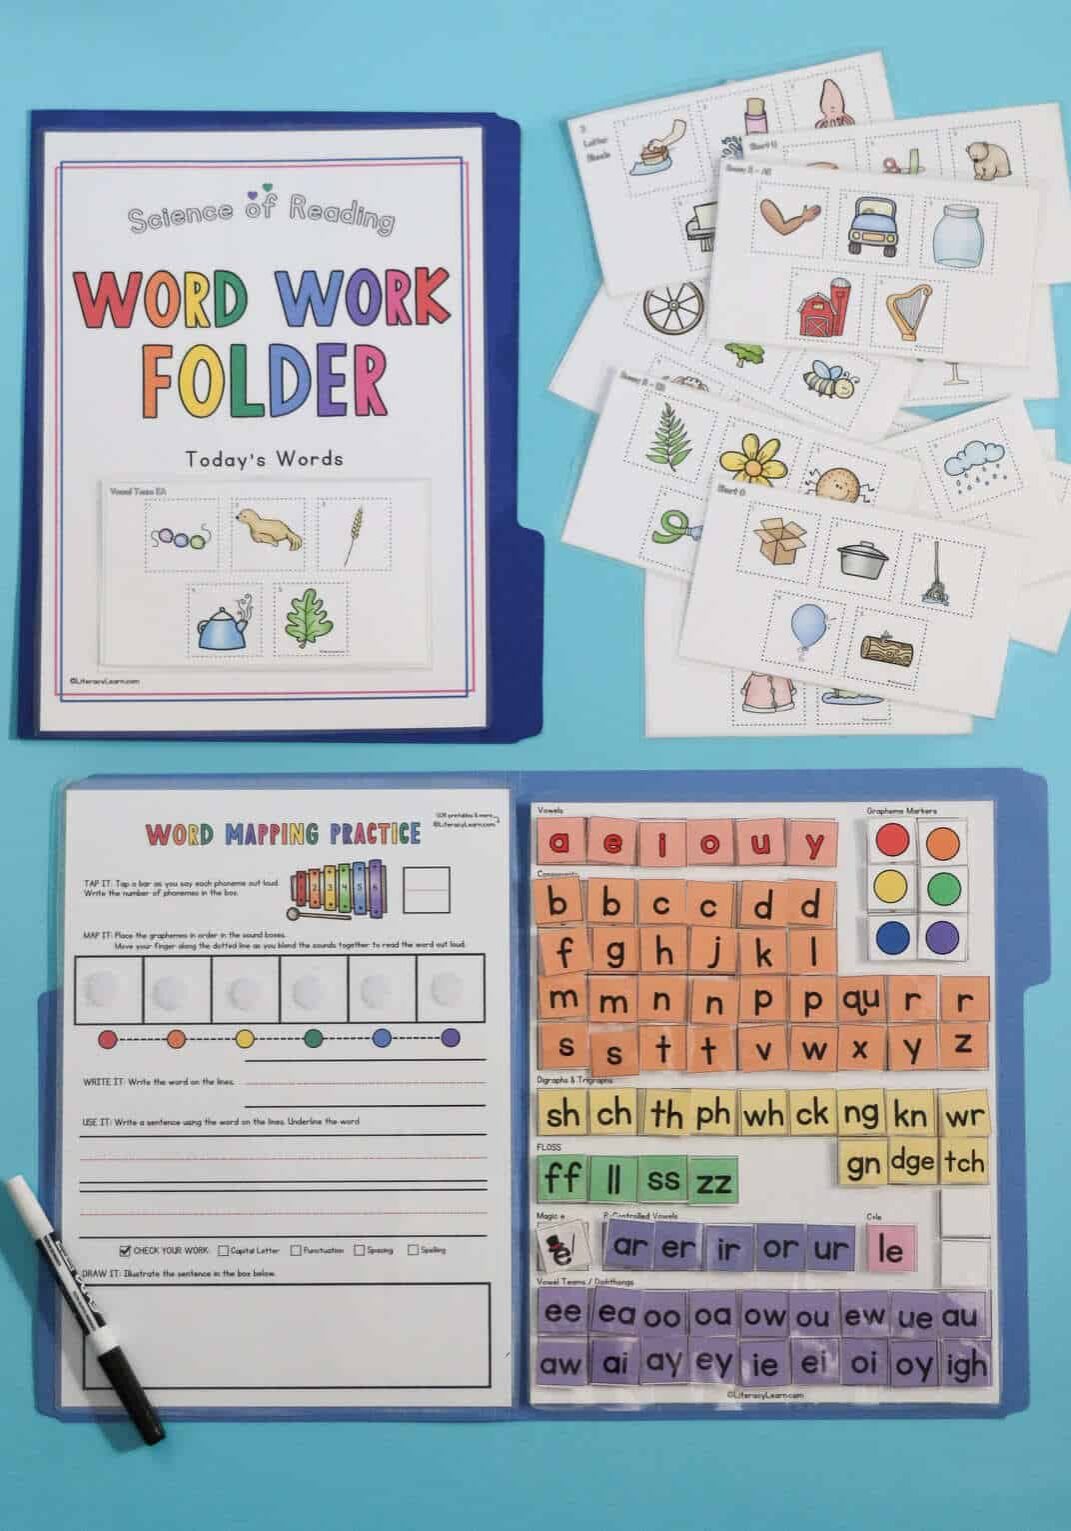 A word work folder with marker and printed phonics skills picture pages.